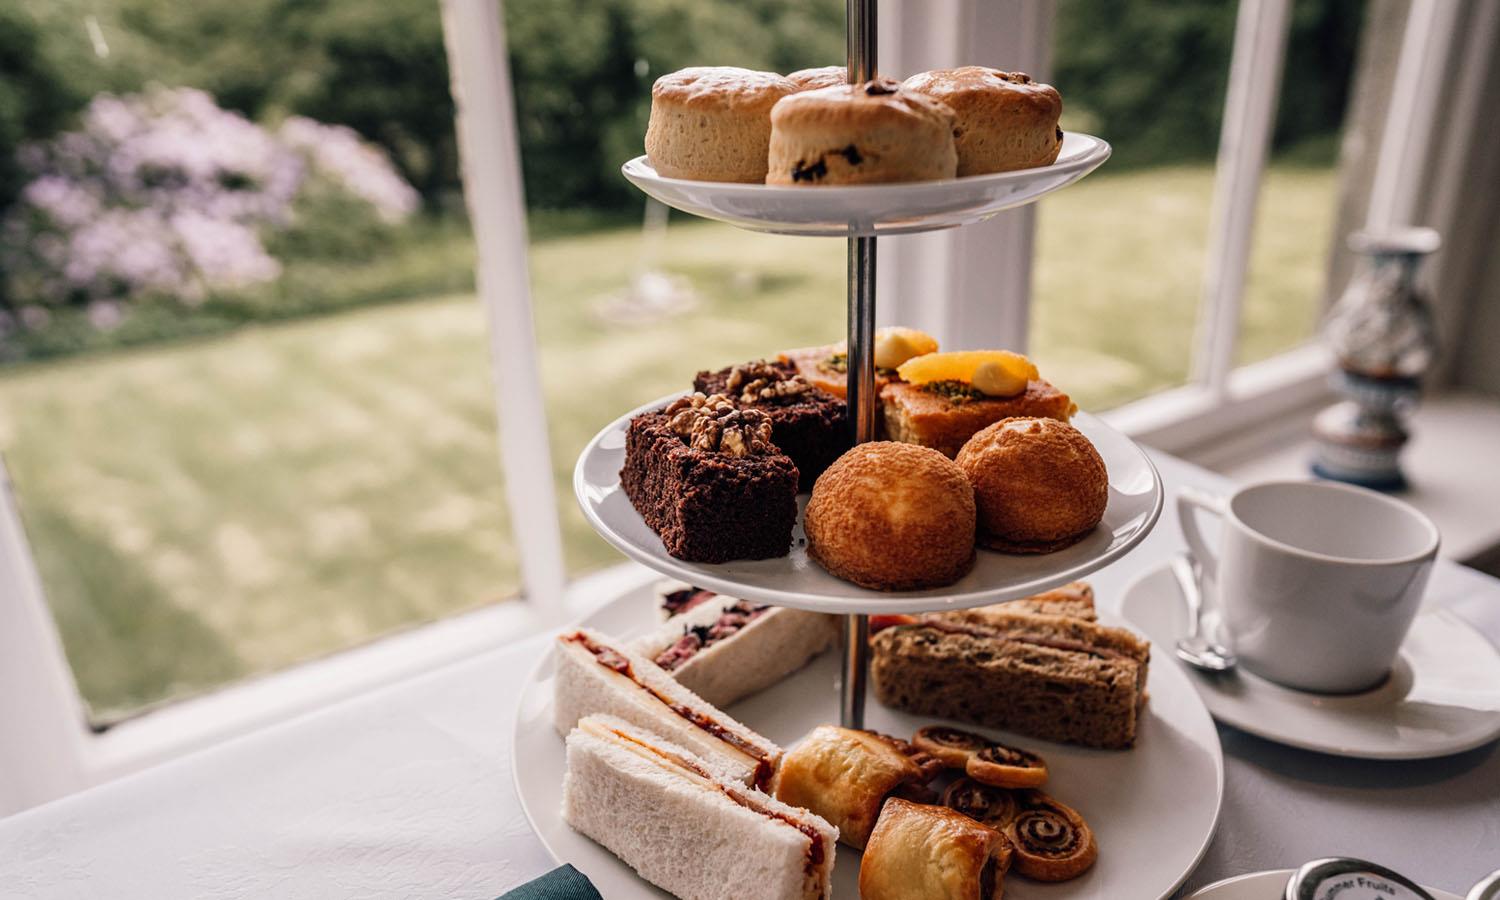 Afternoon tea at Forss House hotel